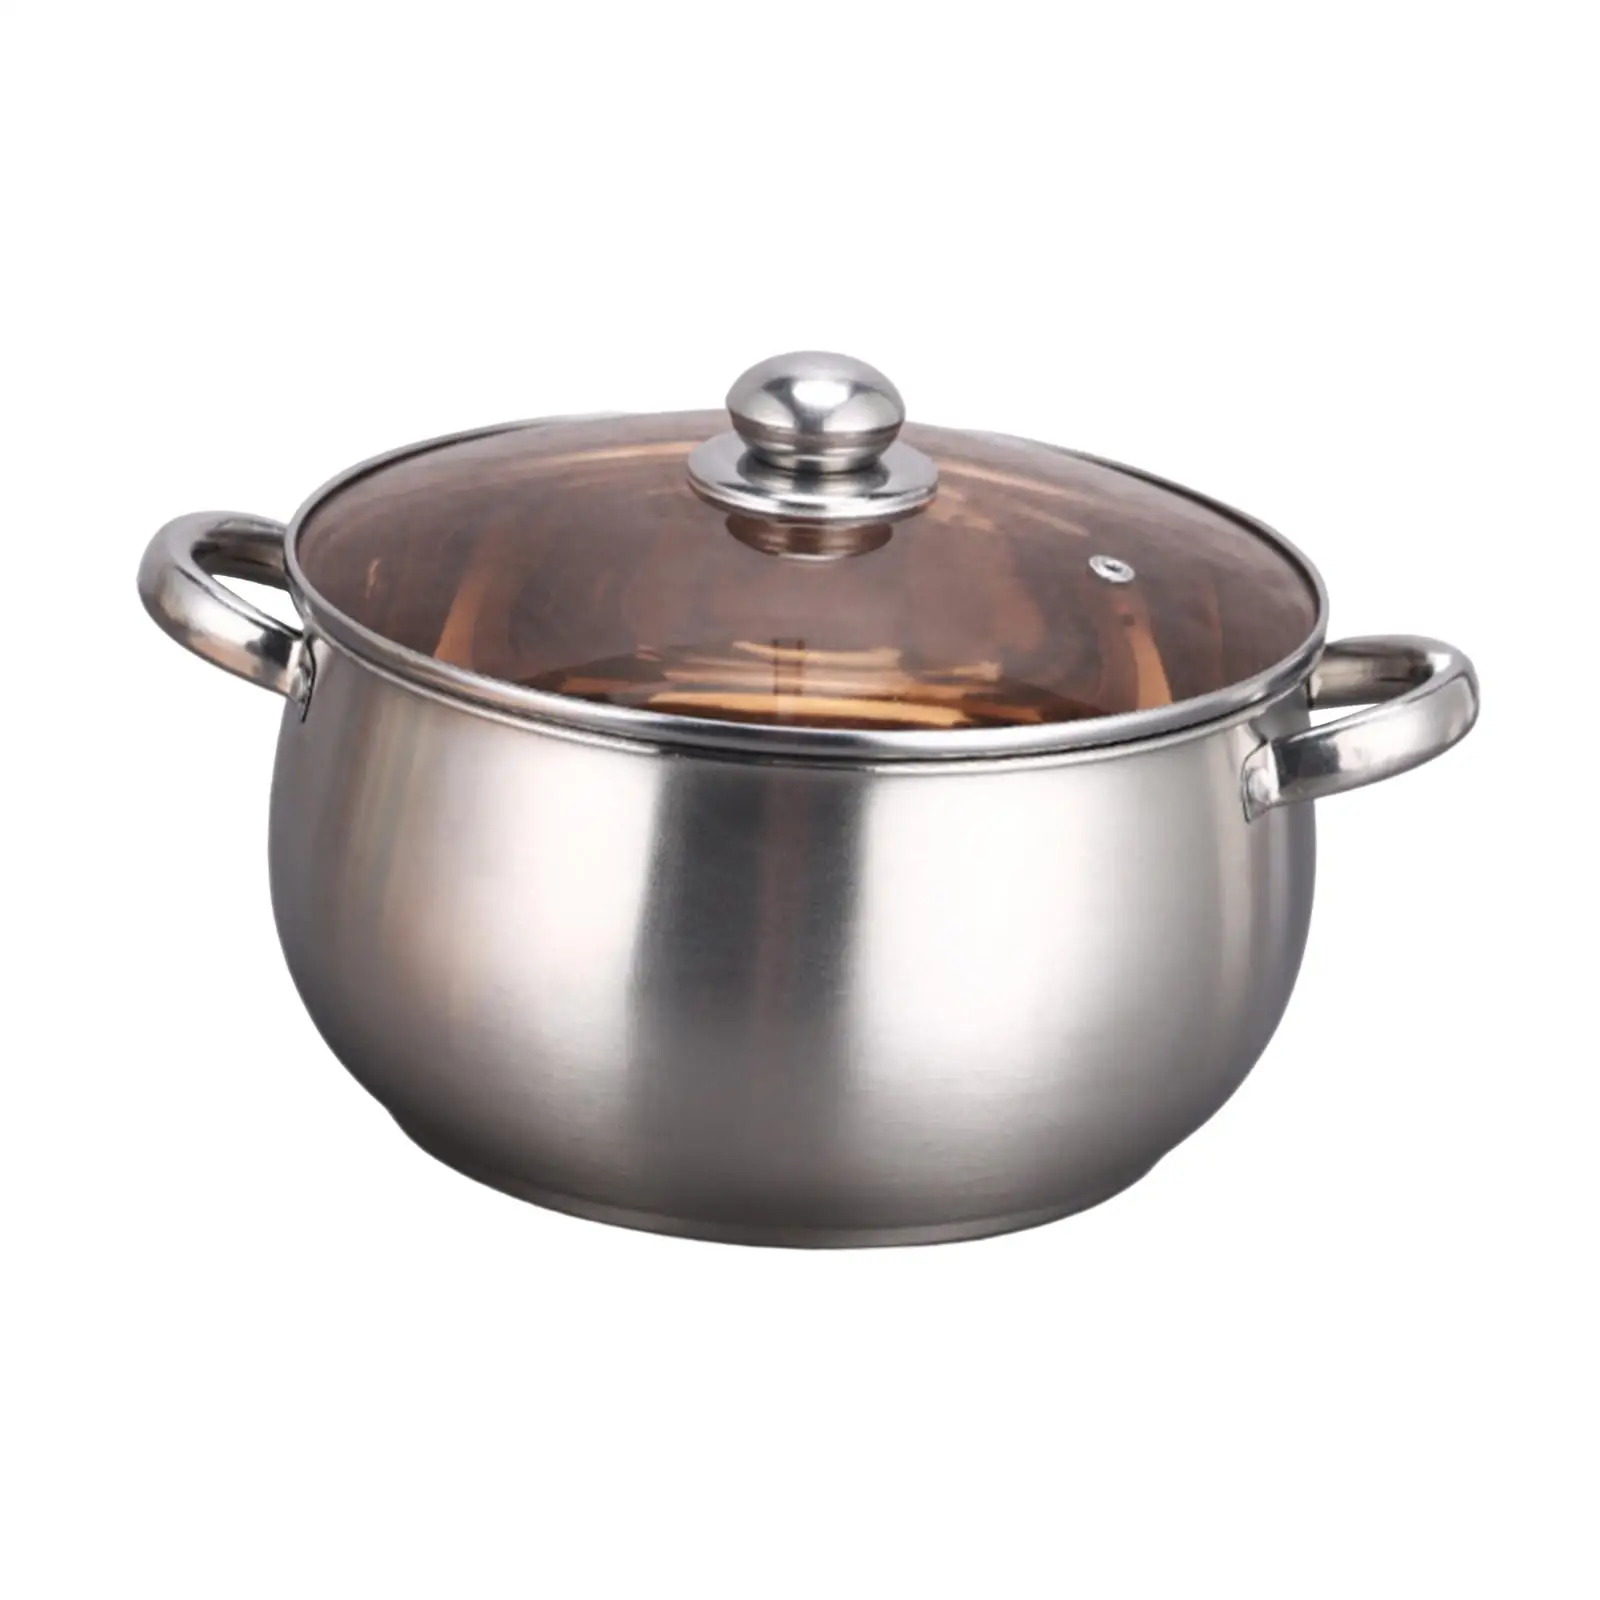 Stainless Steel Stockpot with Lid Pasta Soup Pot Easy to Clean Small Saucepan for Cooking Eggs Warming Milk Vegetables Soup